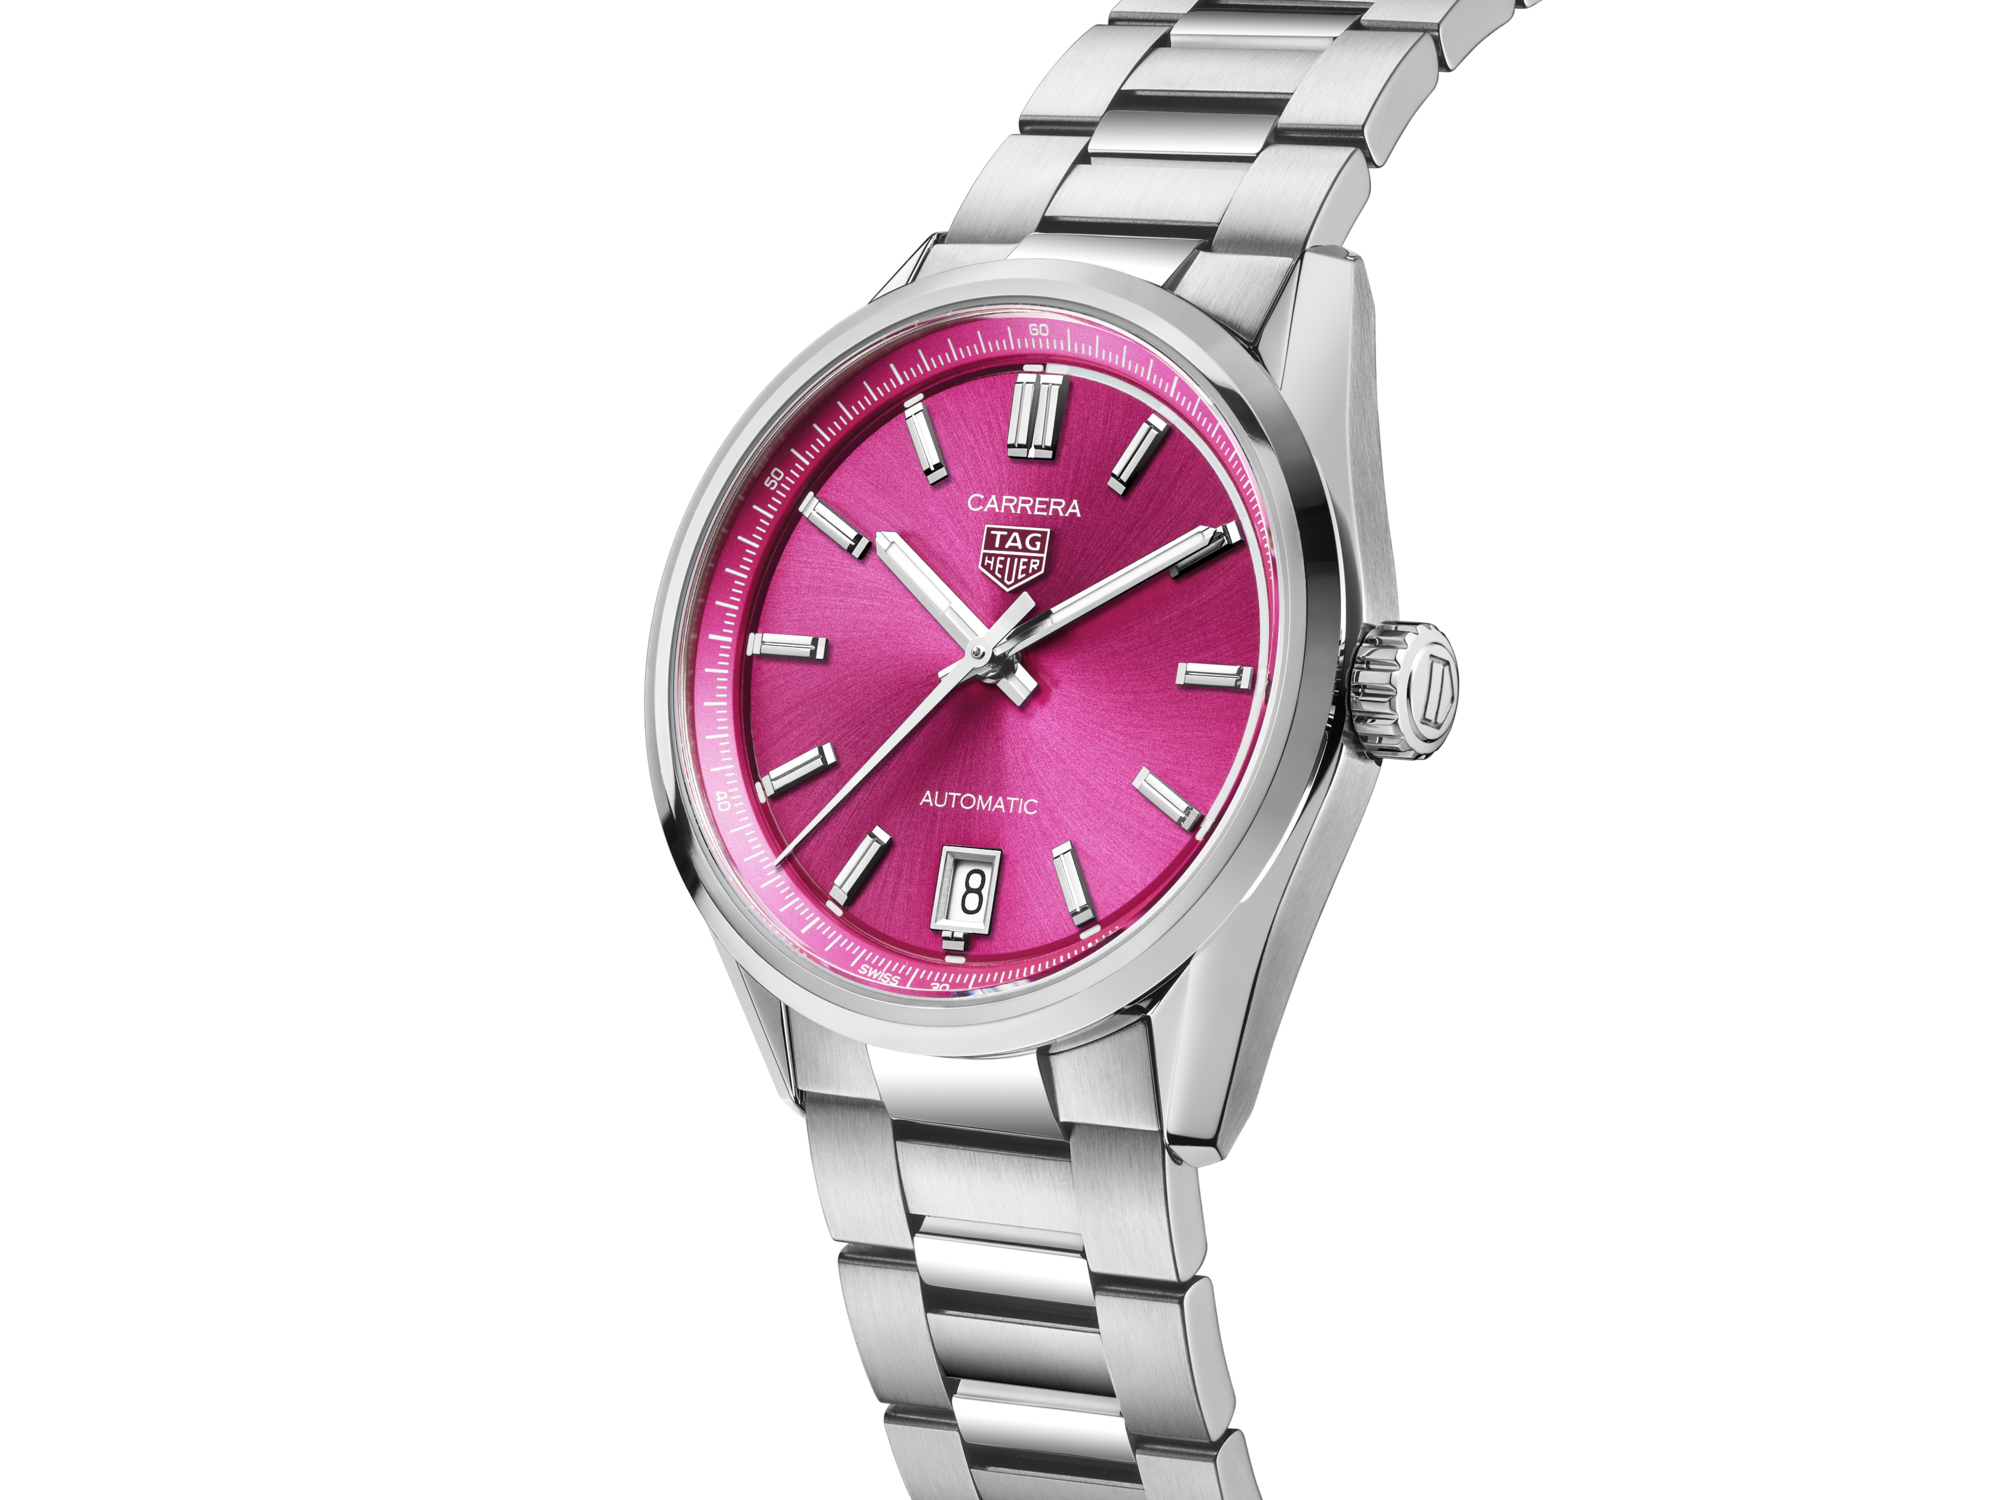 The 2023 36mm Colorful TAG Heuer